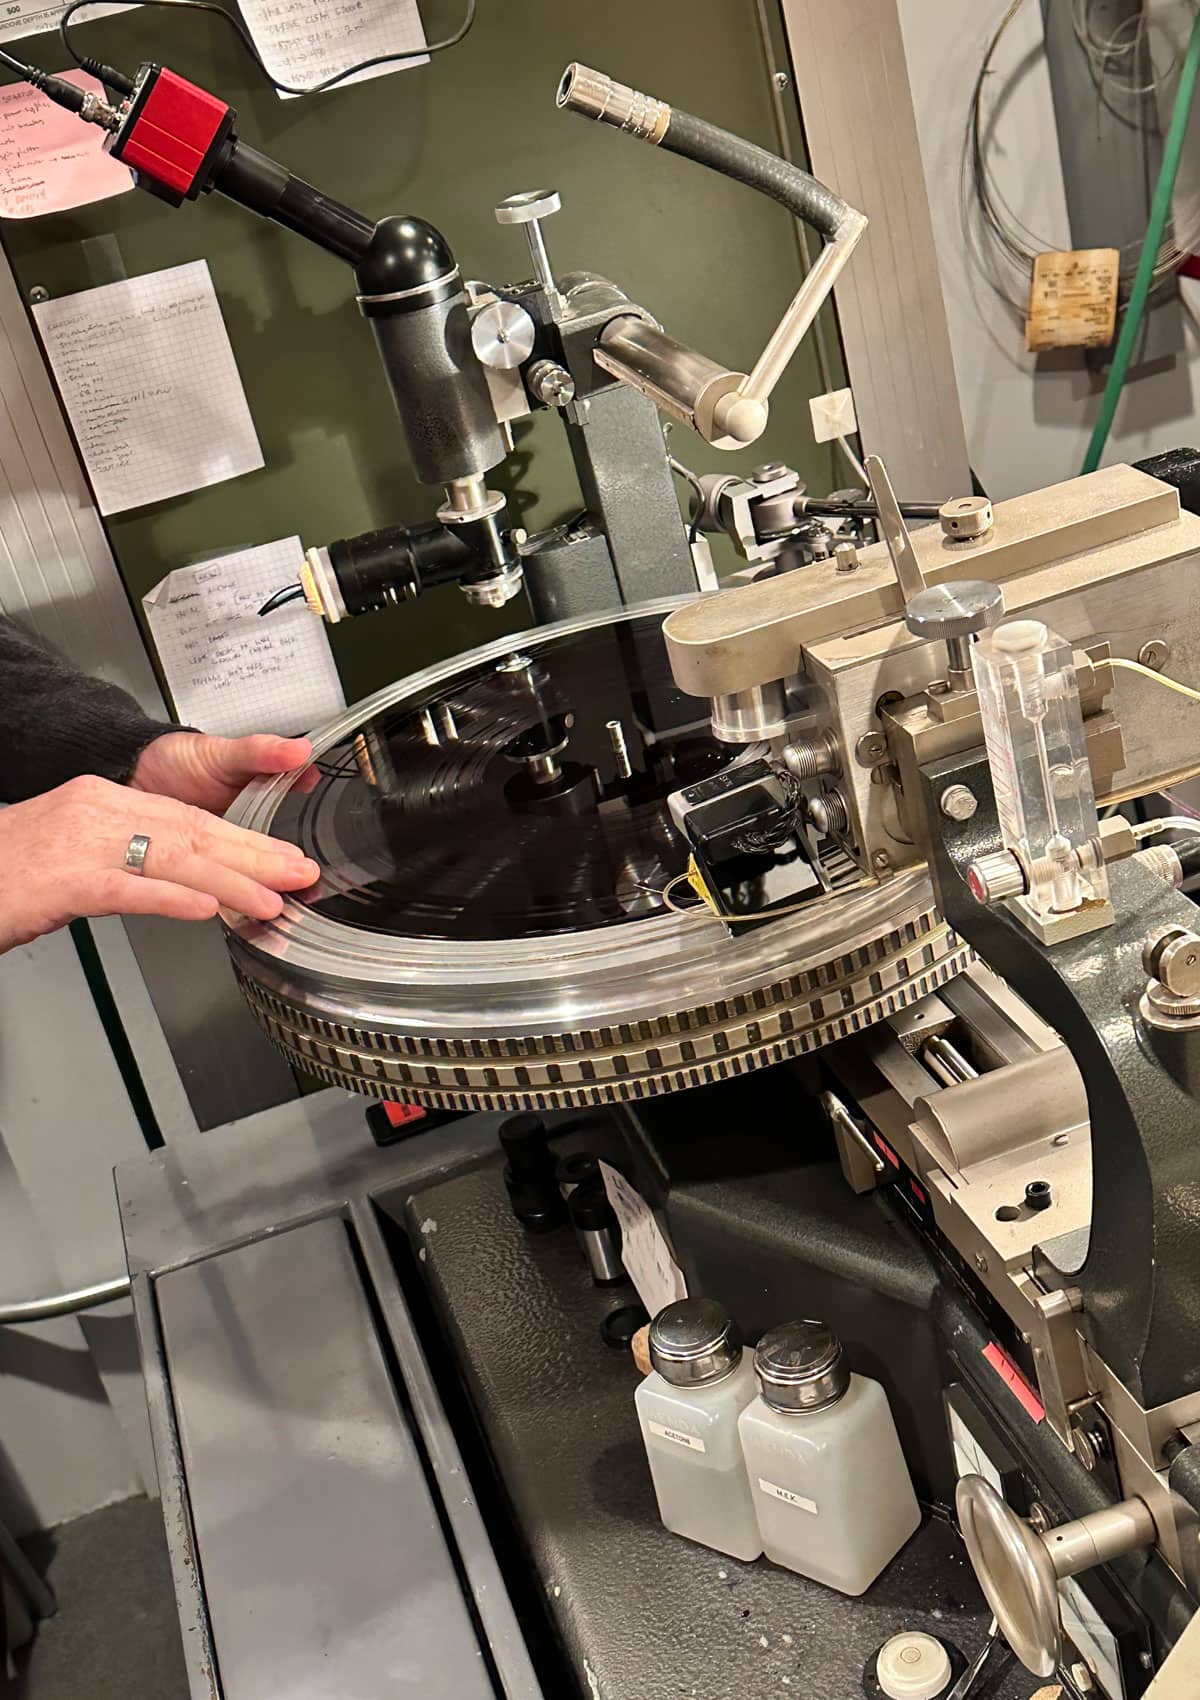 Cutting lathe to cut vinyl records at Chicago Mastering Service with Bob Weston